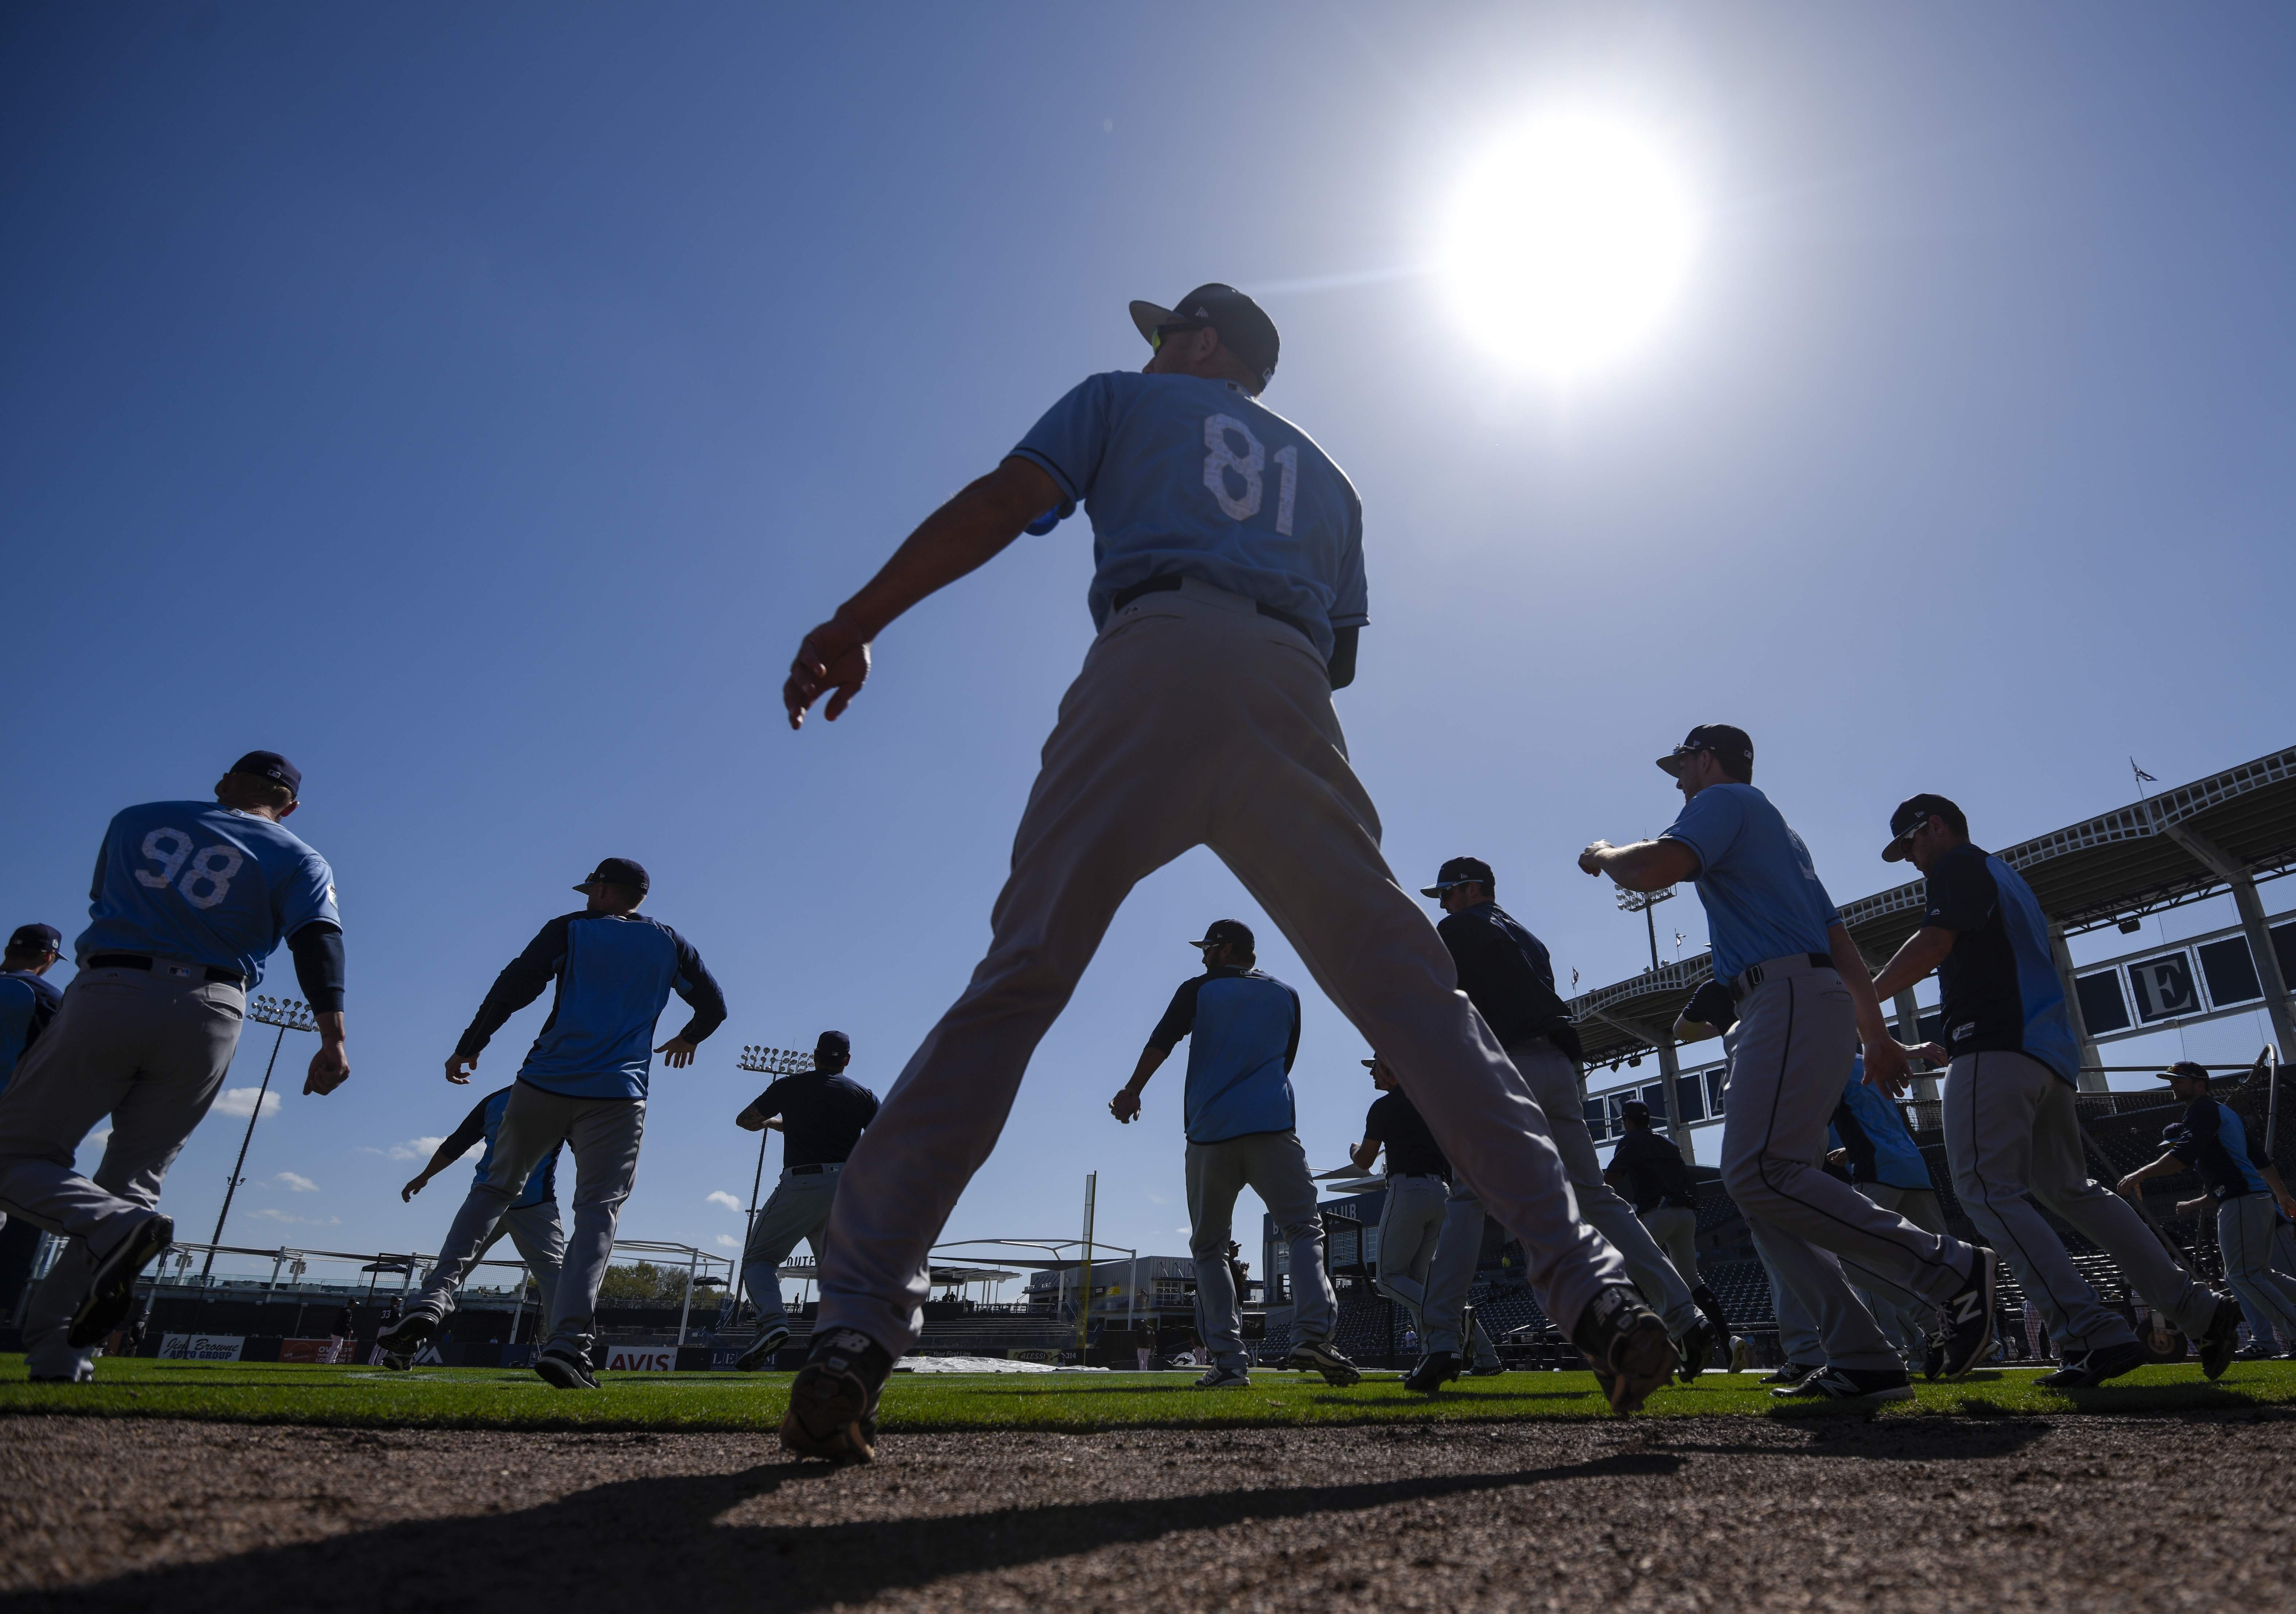 What you need to know about Rays spring training